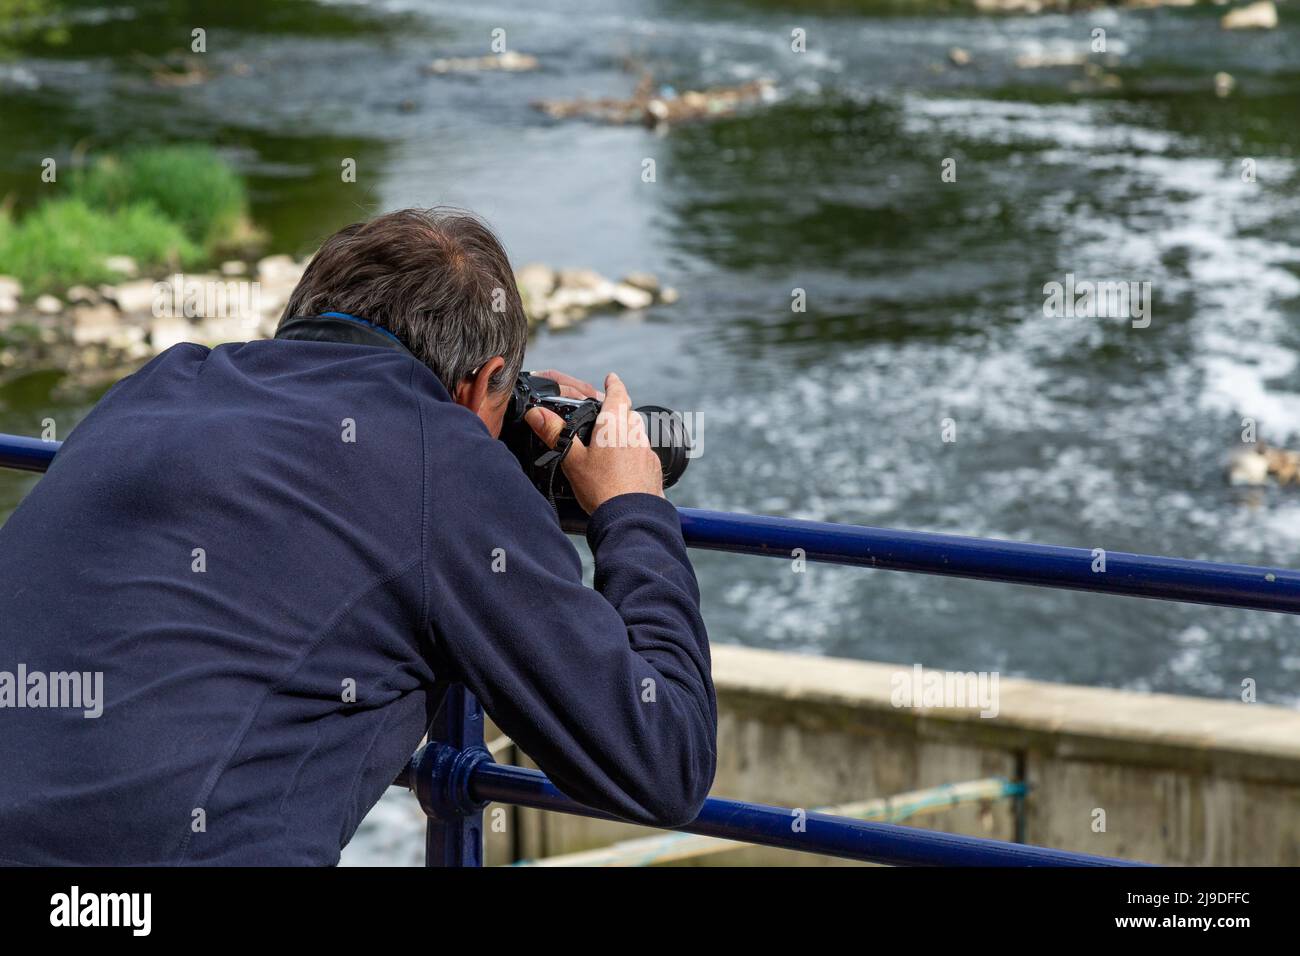 A male photographer leans over railings to capture an image of the River Aire in Saltaire, Yorkshire. Stock Photo